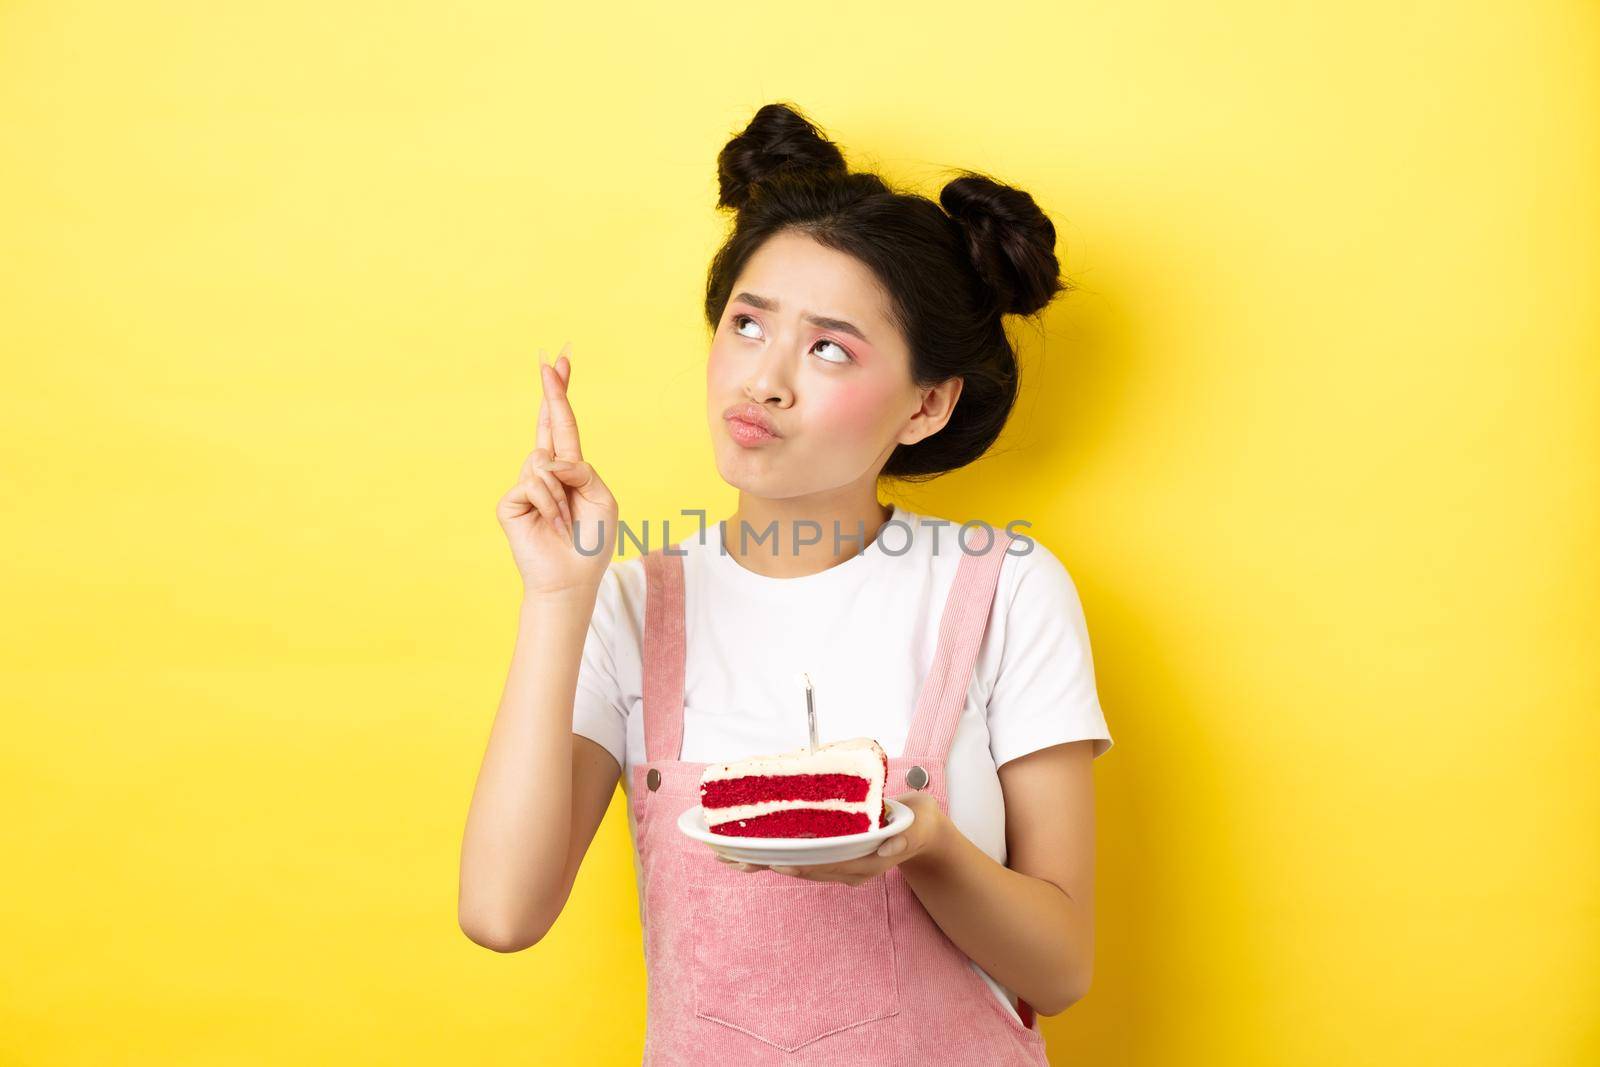 Holidays and celebration. Cute asian birthday girl making wish at party wish cake and candle, cross fingers and looking up, standing on yellow background.